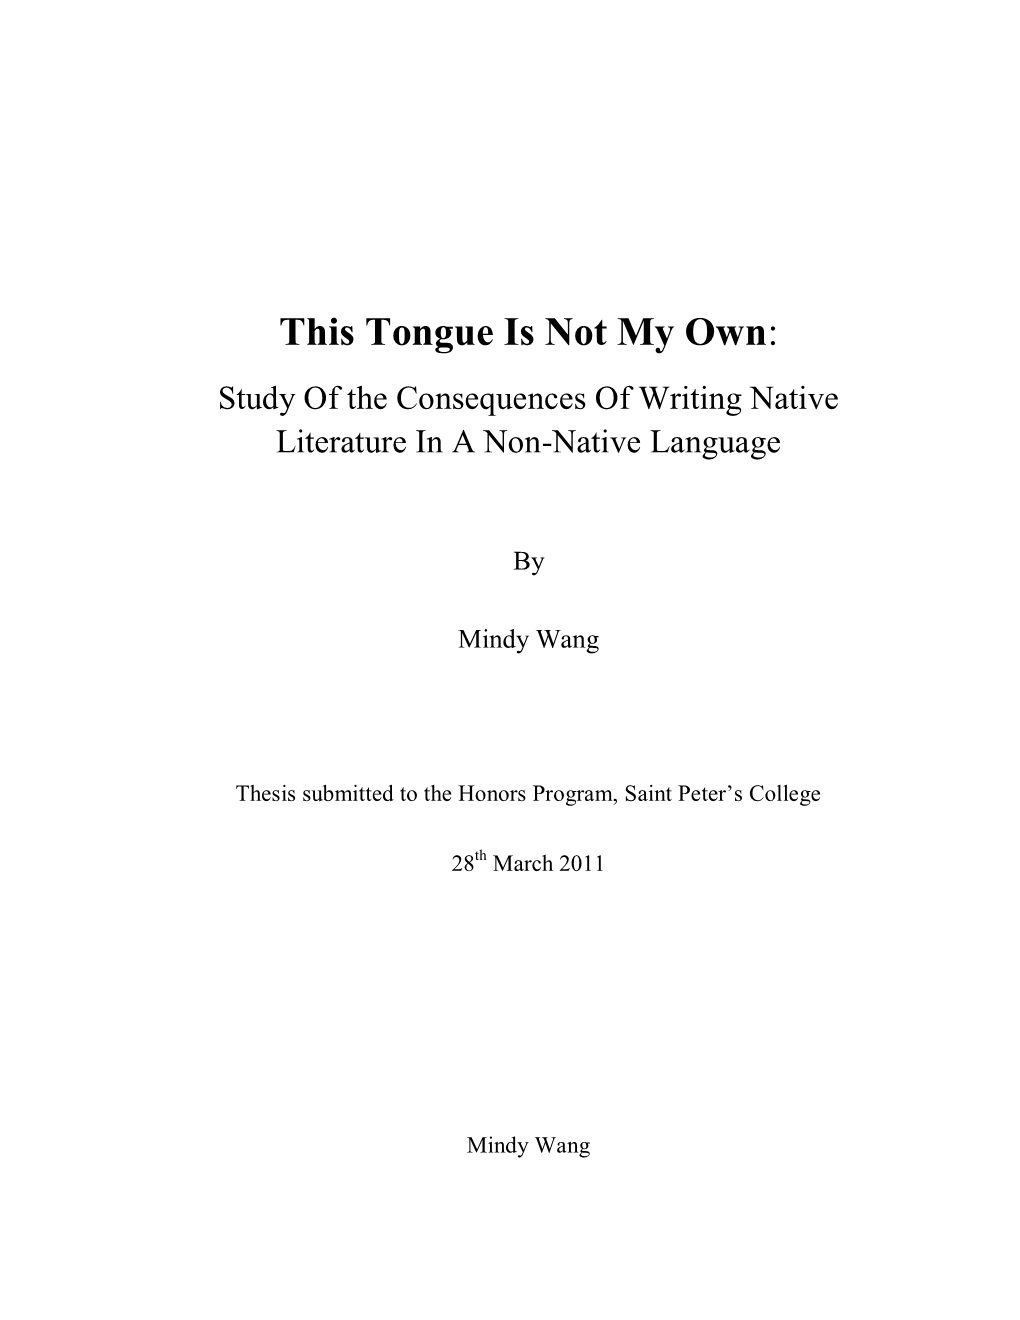 This Tongue Is Not My Own: Study of the Consequences of Writing Native Literature in a Non-Native Language